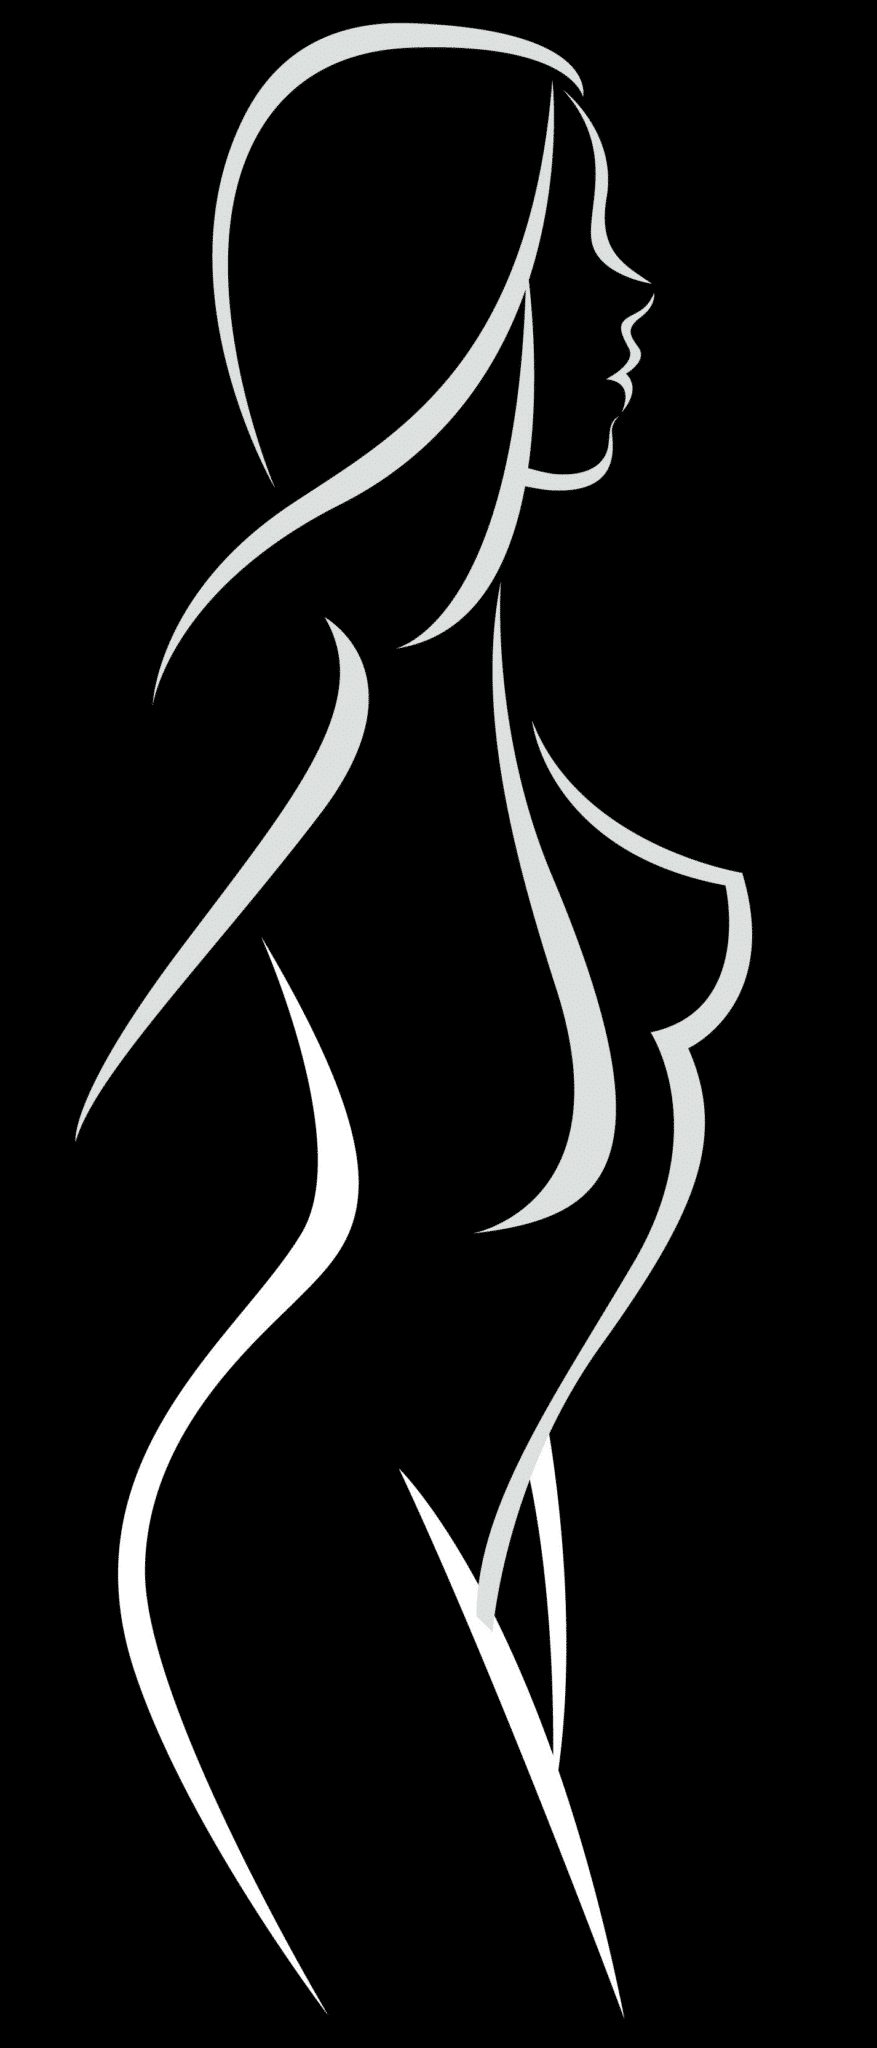 black background with white silhouette illustration of a woman